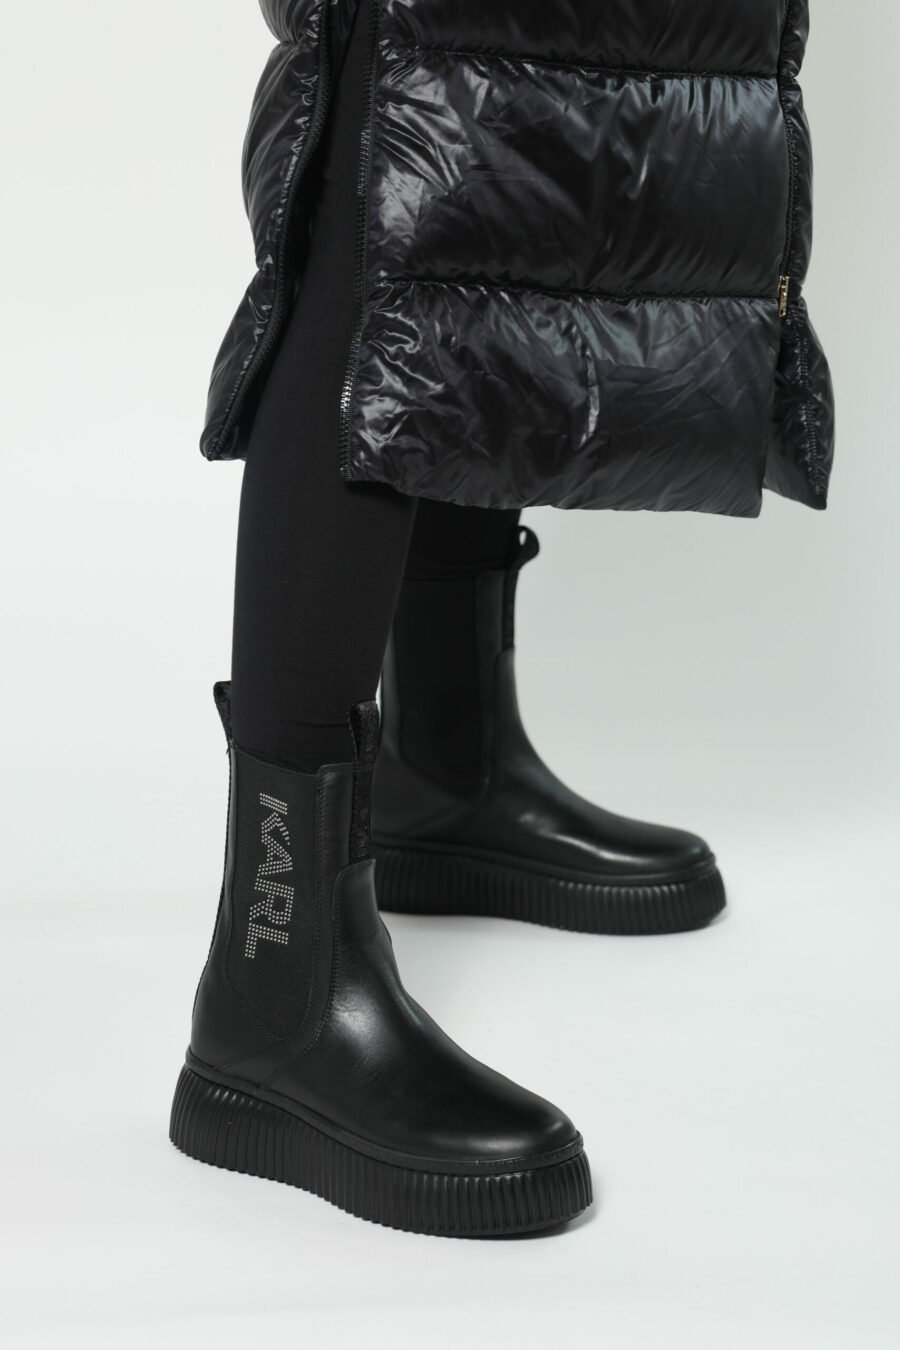 Black ankle boots with vertical logo and platform - 8052865435499 160 scaled